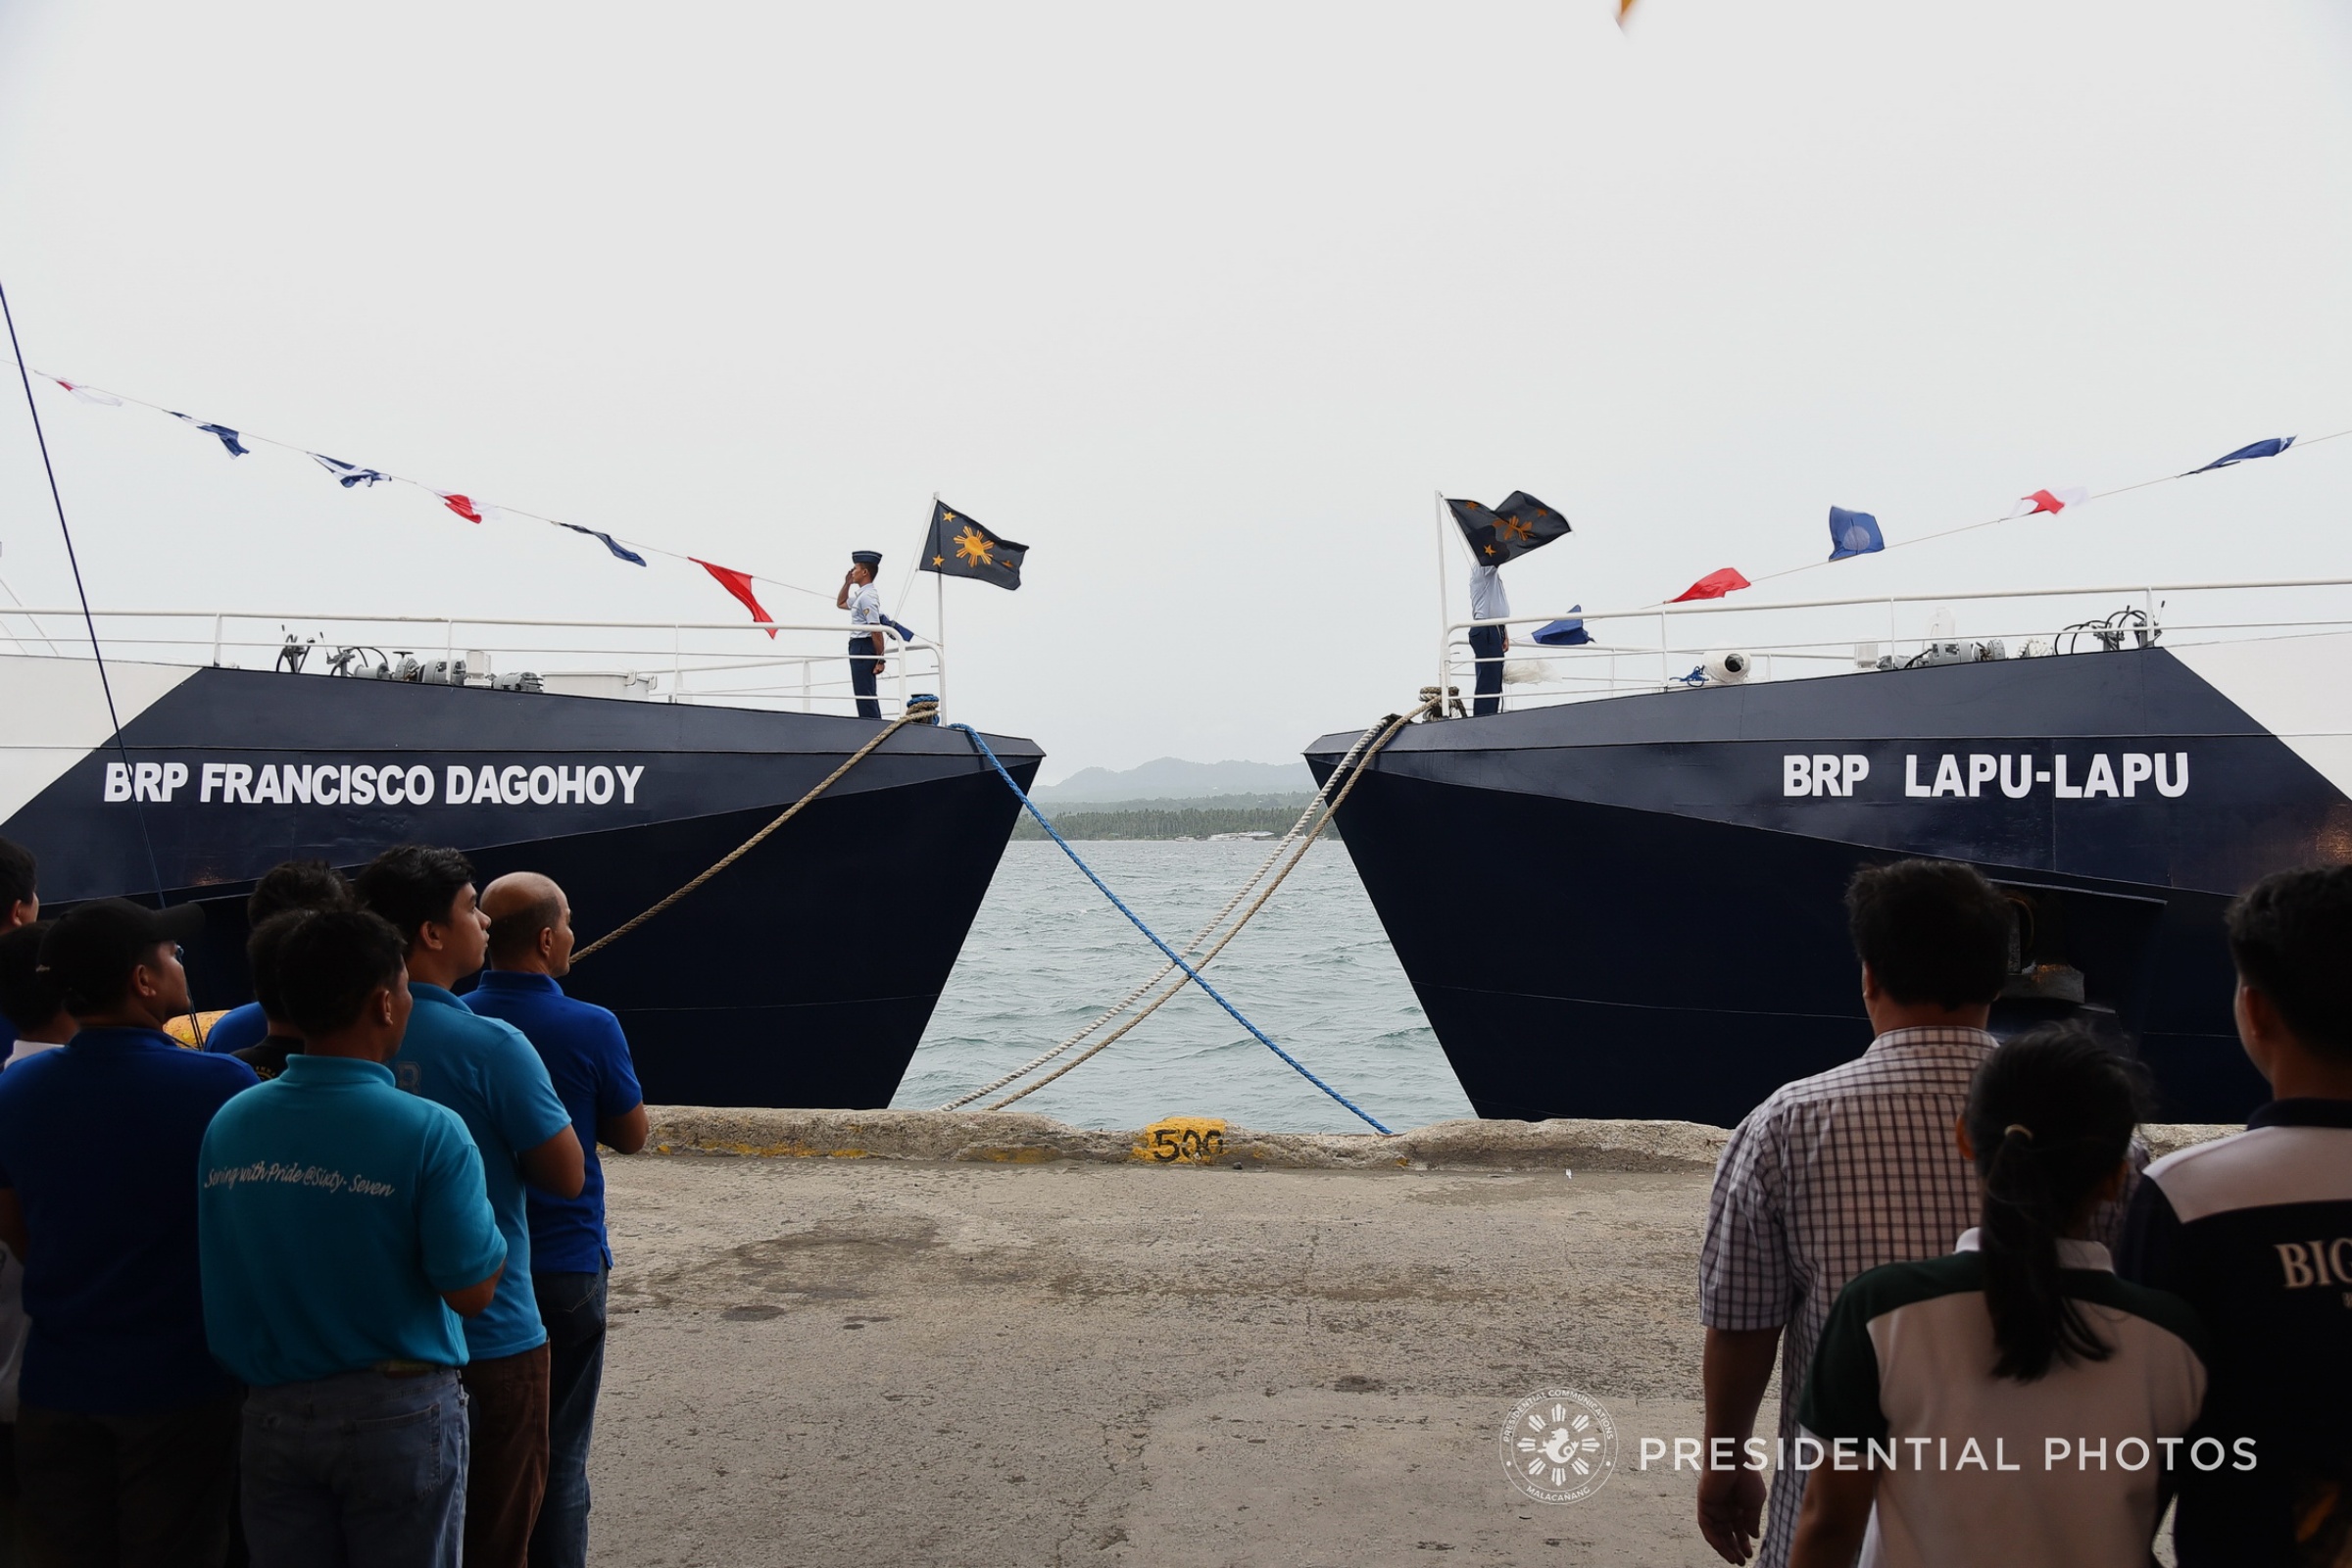 NEW VESSELS. BRP Lapu-Lapu and BRP Francisco Dagohoy are commissioned during a ceremony led by President Rodrigo Duterte at the Sasa Wharf in Davao City on December 21, 2017. Malacañang photo 